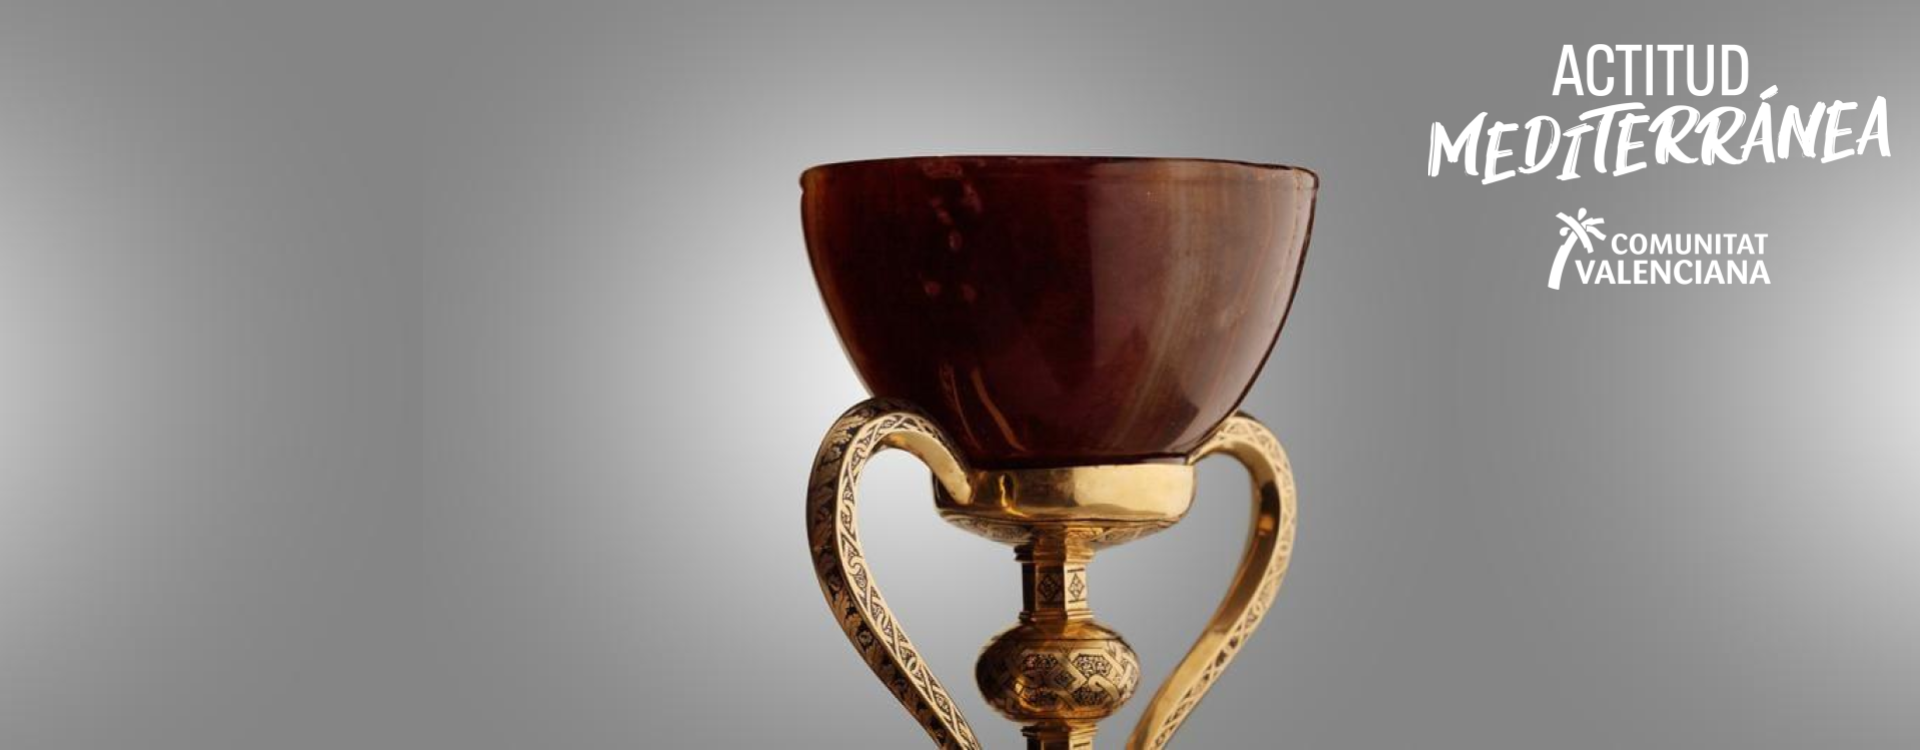 Image of the Holy Chalice in Valencia Cathedral